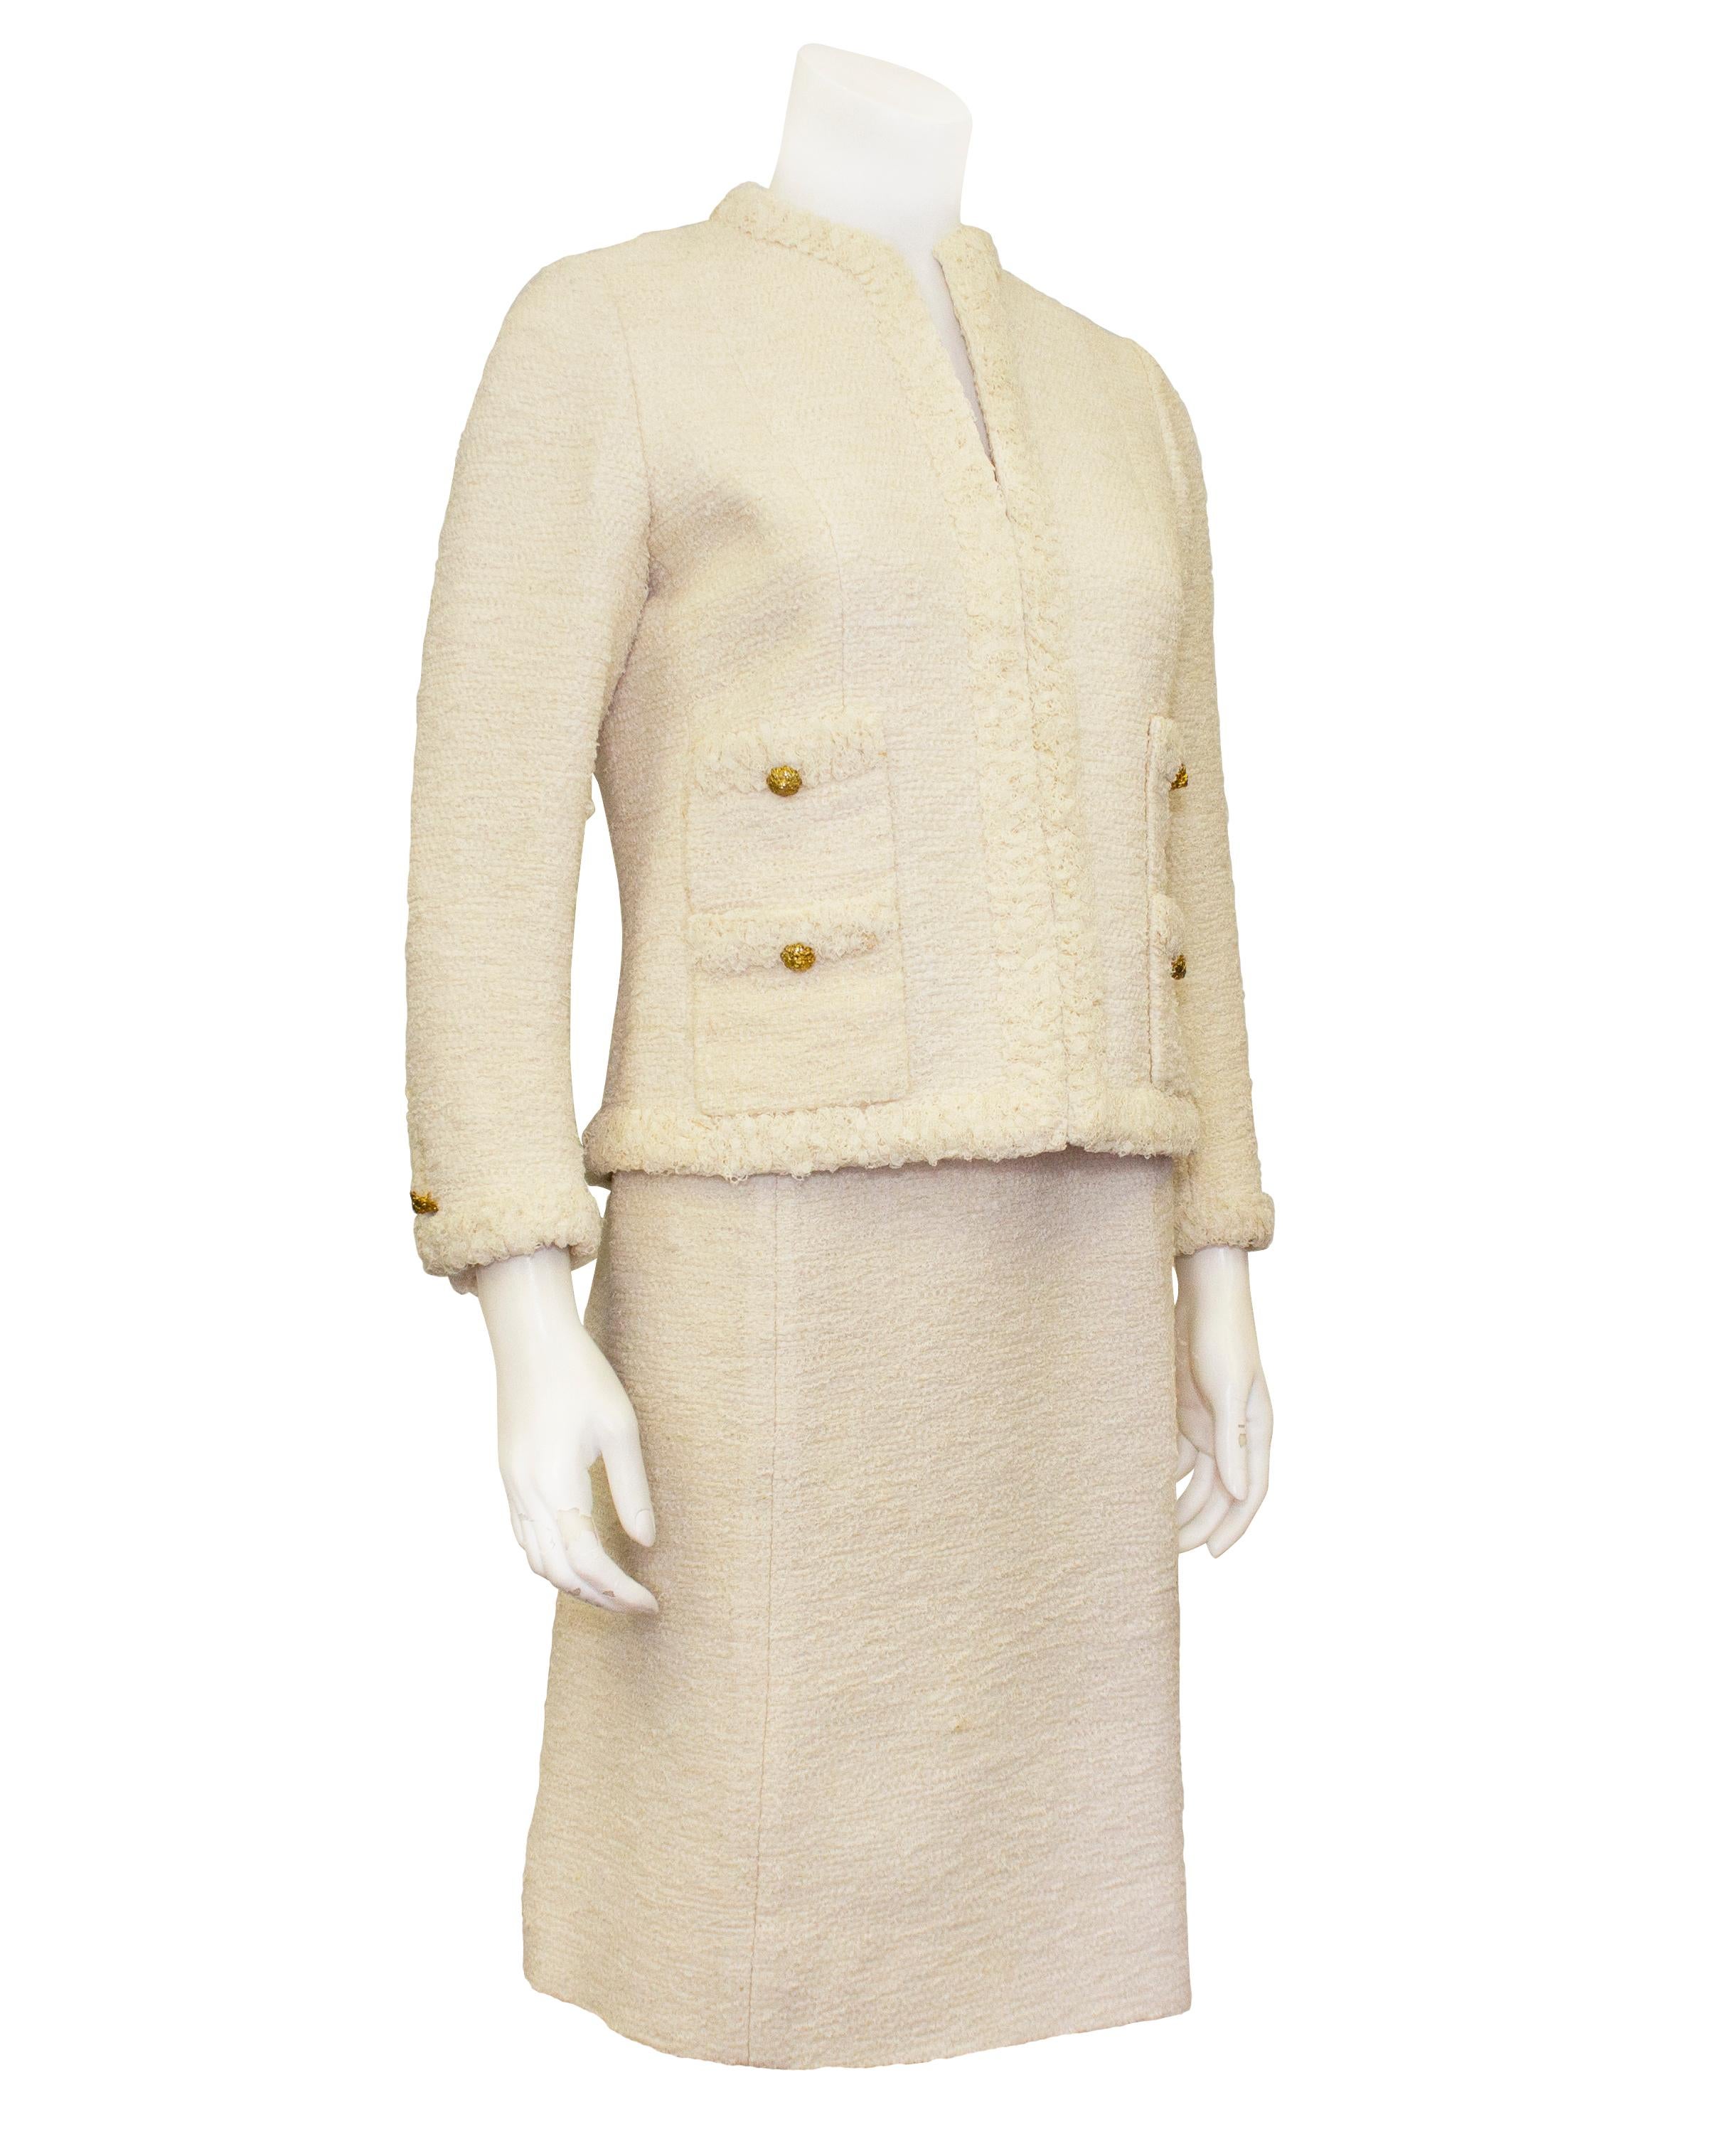 A subtle and effortlessly stunning cream tweed Chanel Haute Couture skirt suit from the 1960s. The jacket is collarless with four patch slit pockets and hook and eye closures. The jacket is fully trimmed in ruched lace that creates a fringe like